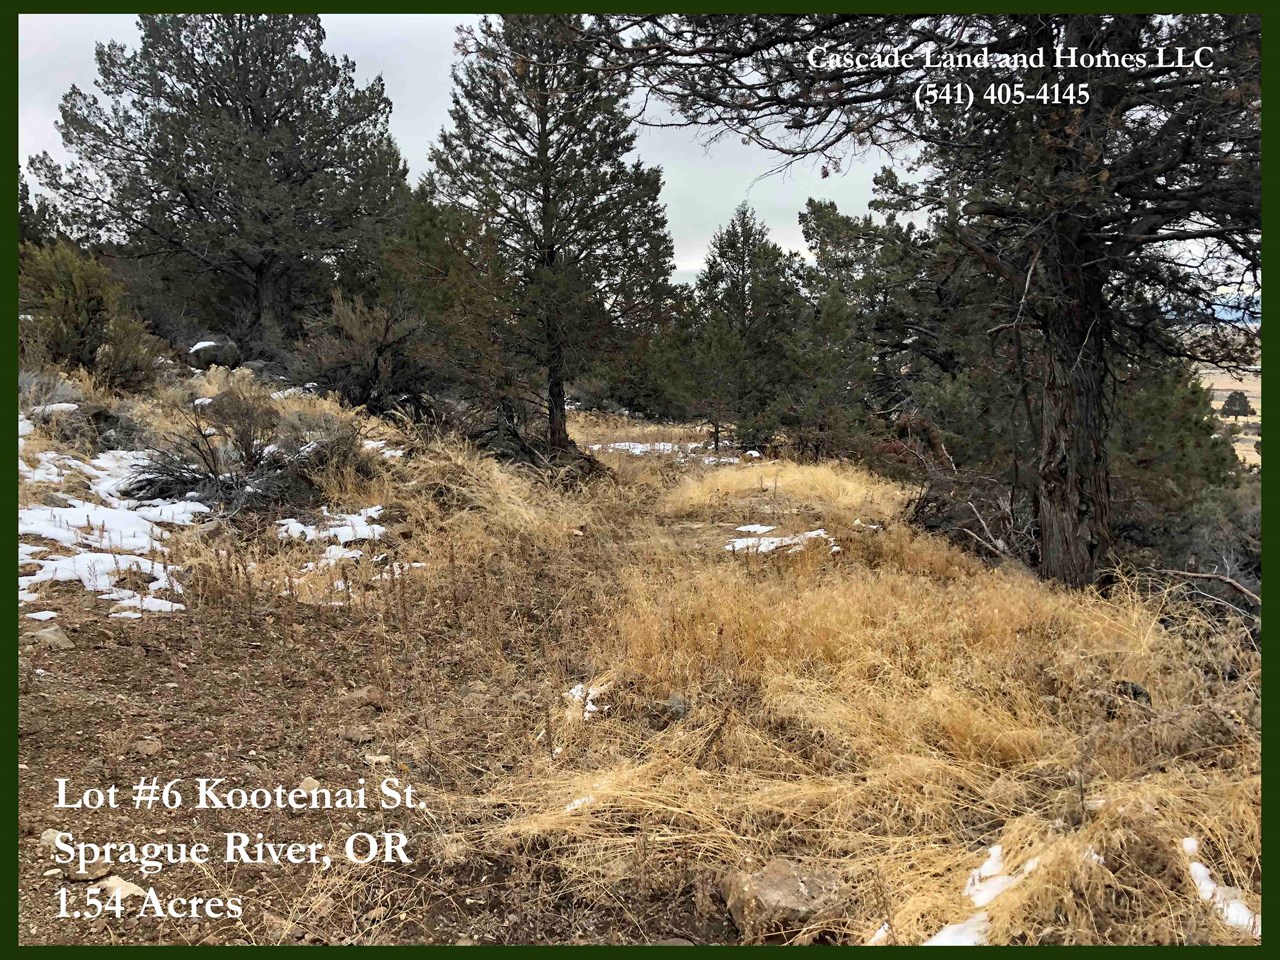 there has been some clearing done on the property by prior owners to provide possible homesites that would take full advantage of the views and have easy access.